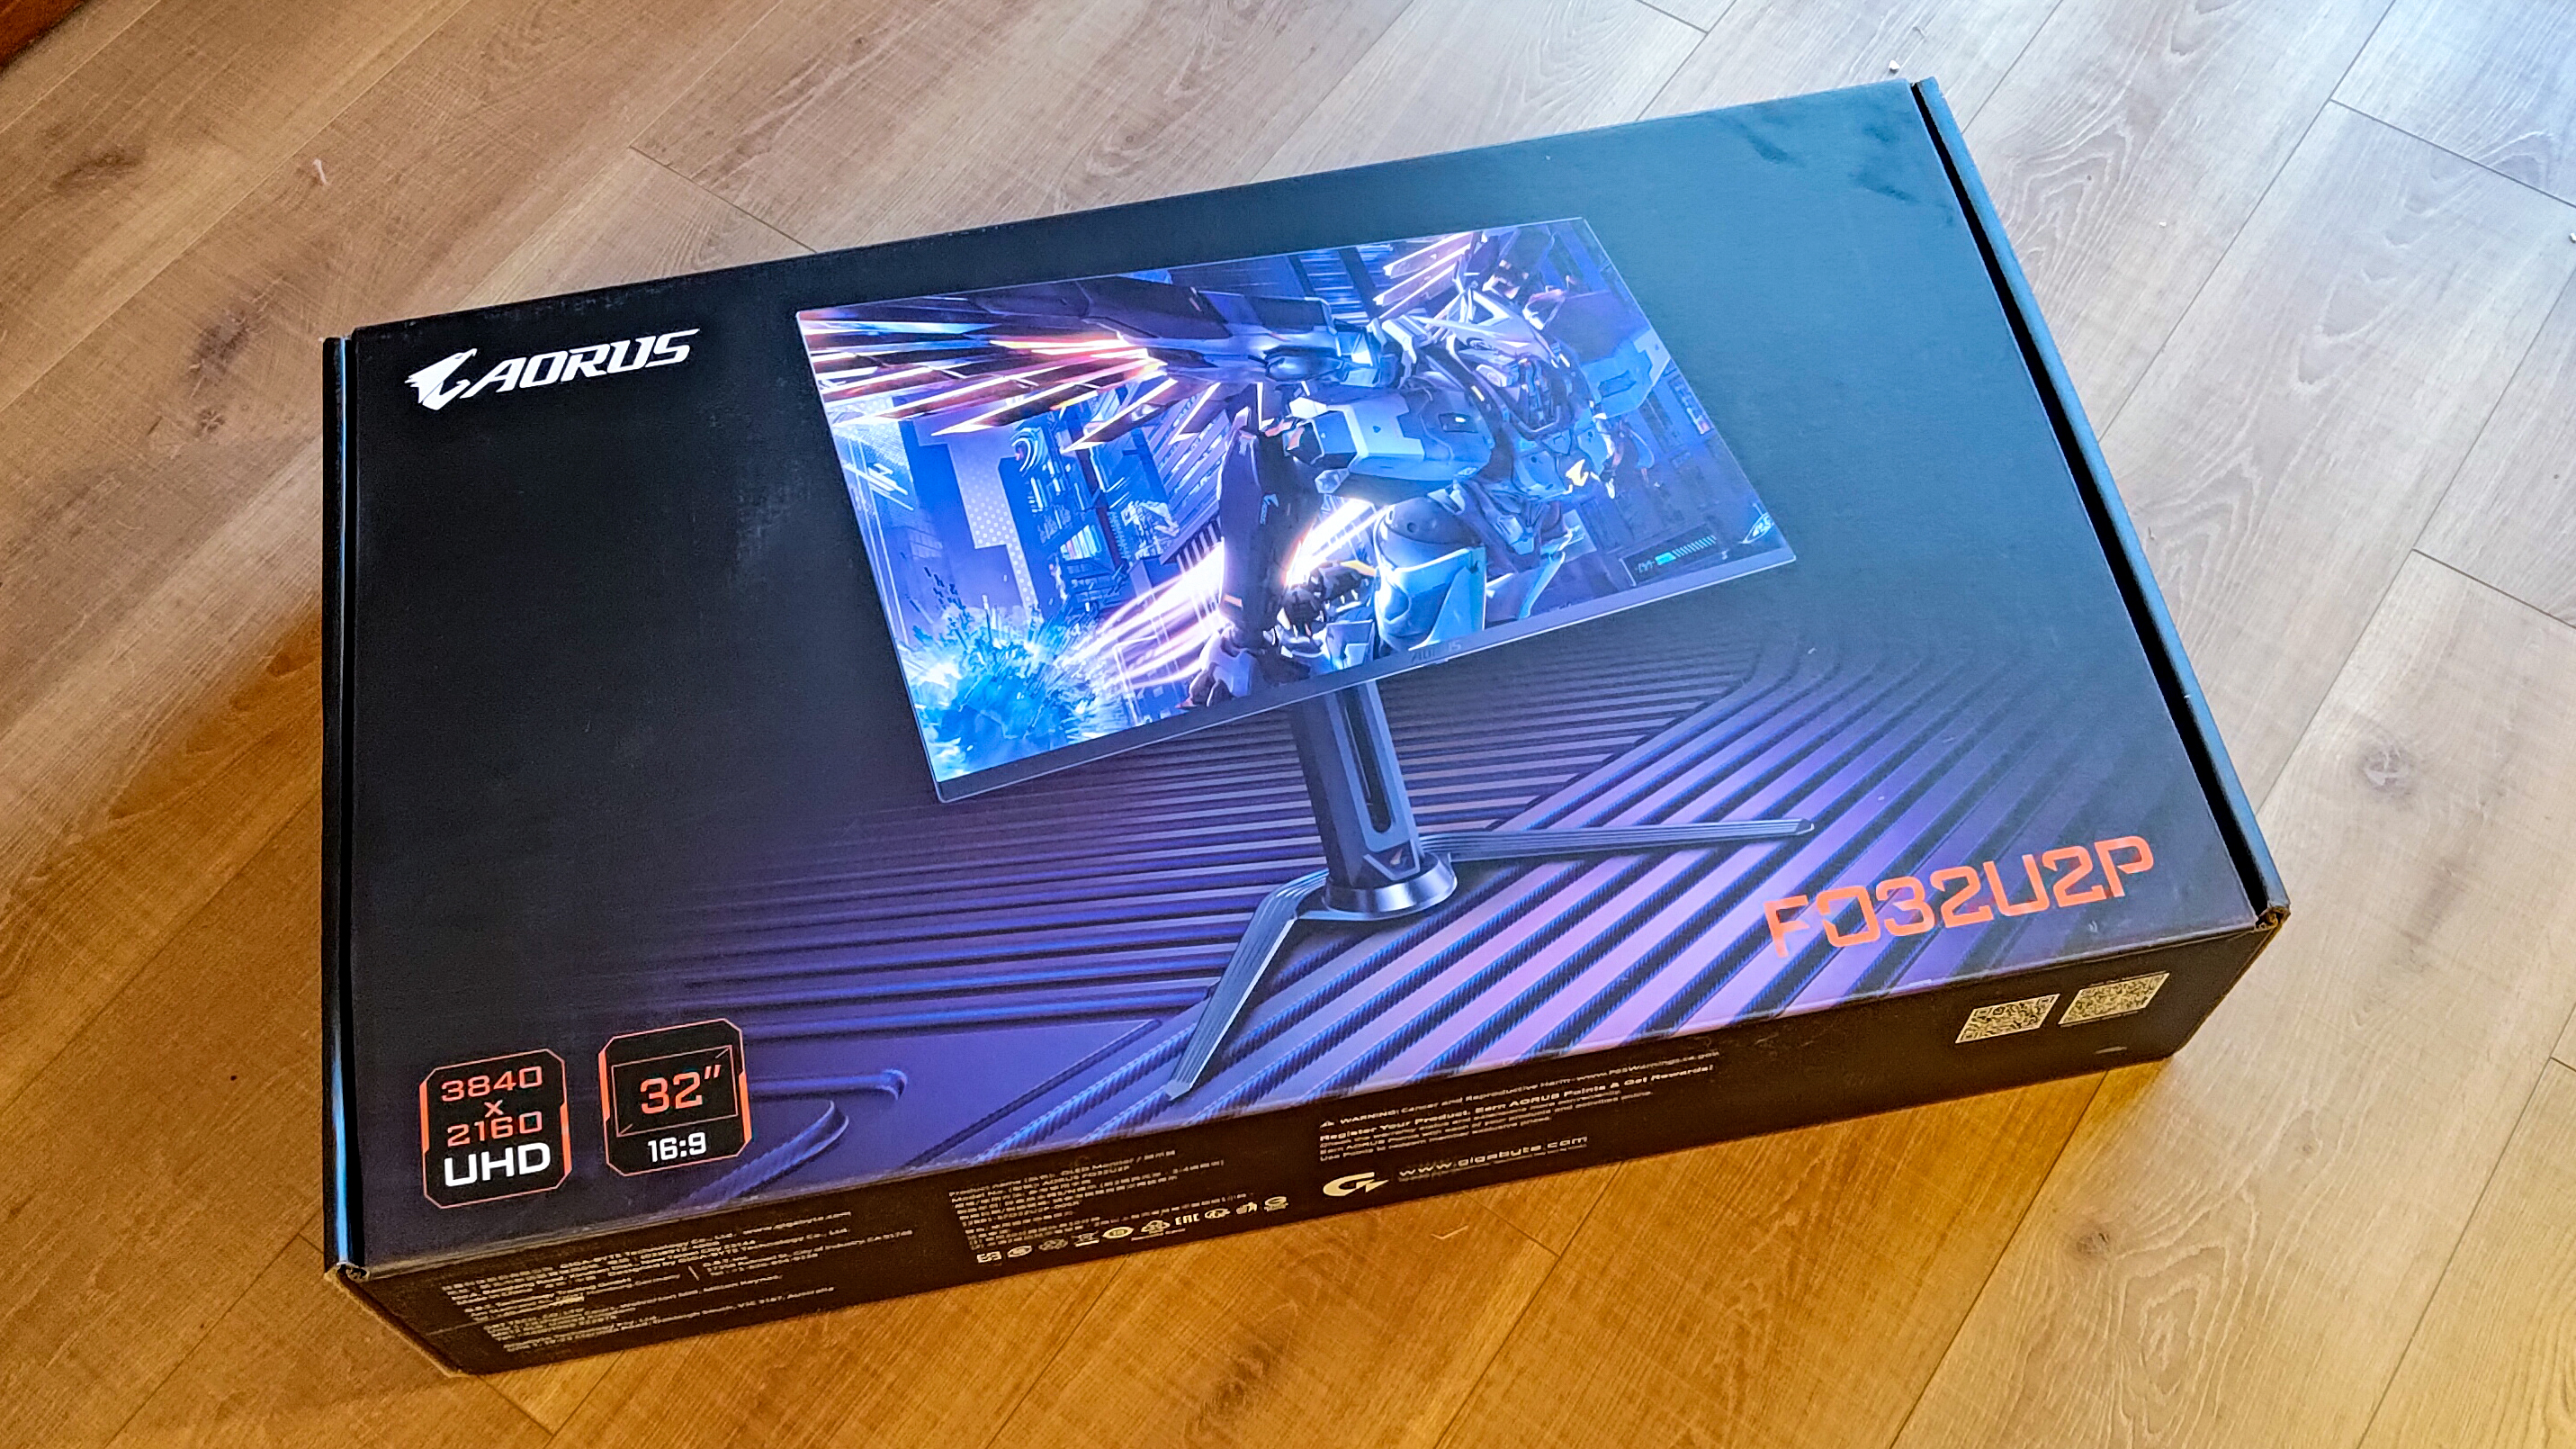 The packaging for the Gigabyte Aorus FO32U2P gaming monitor